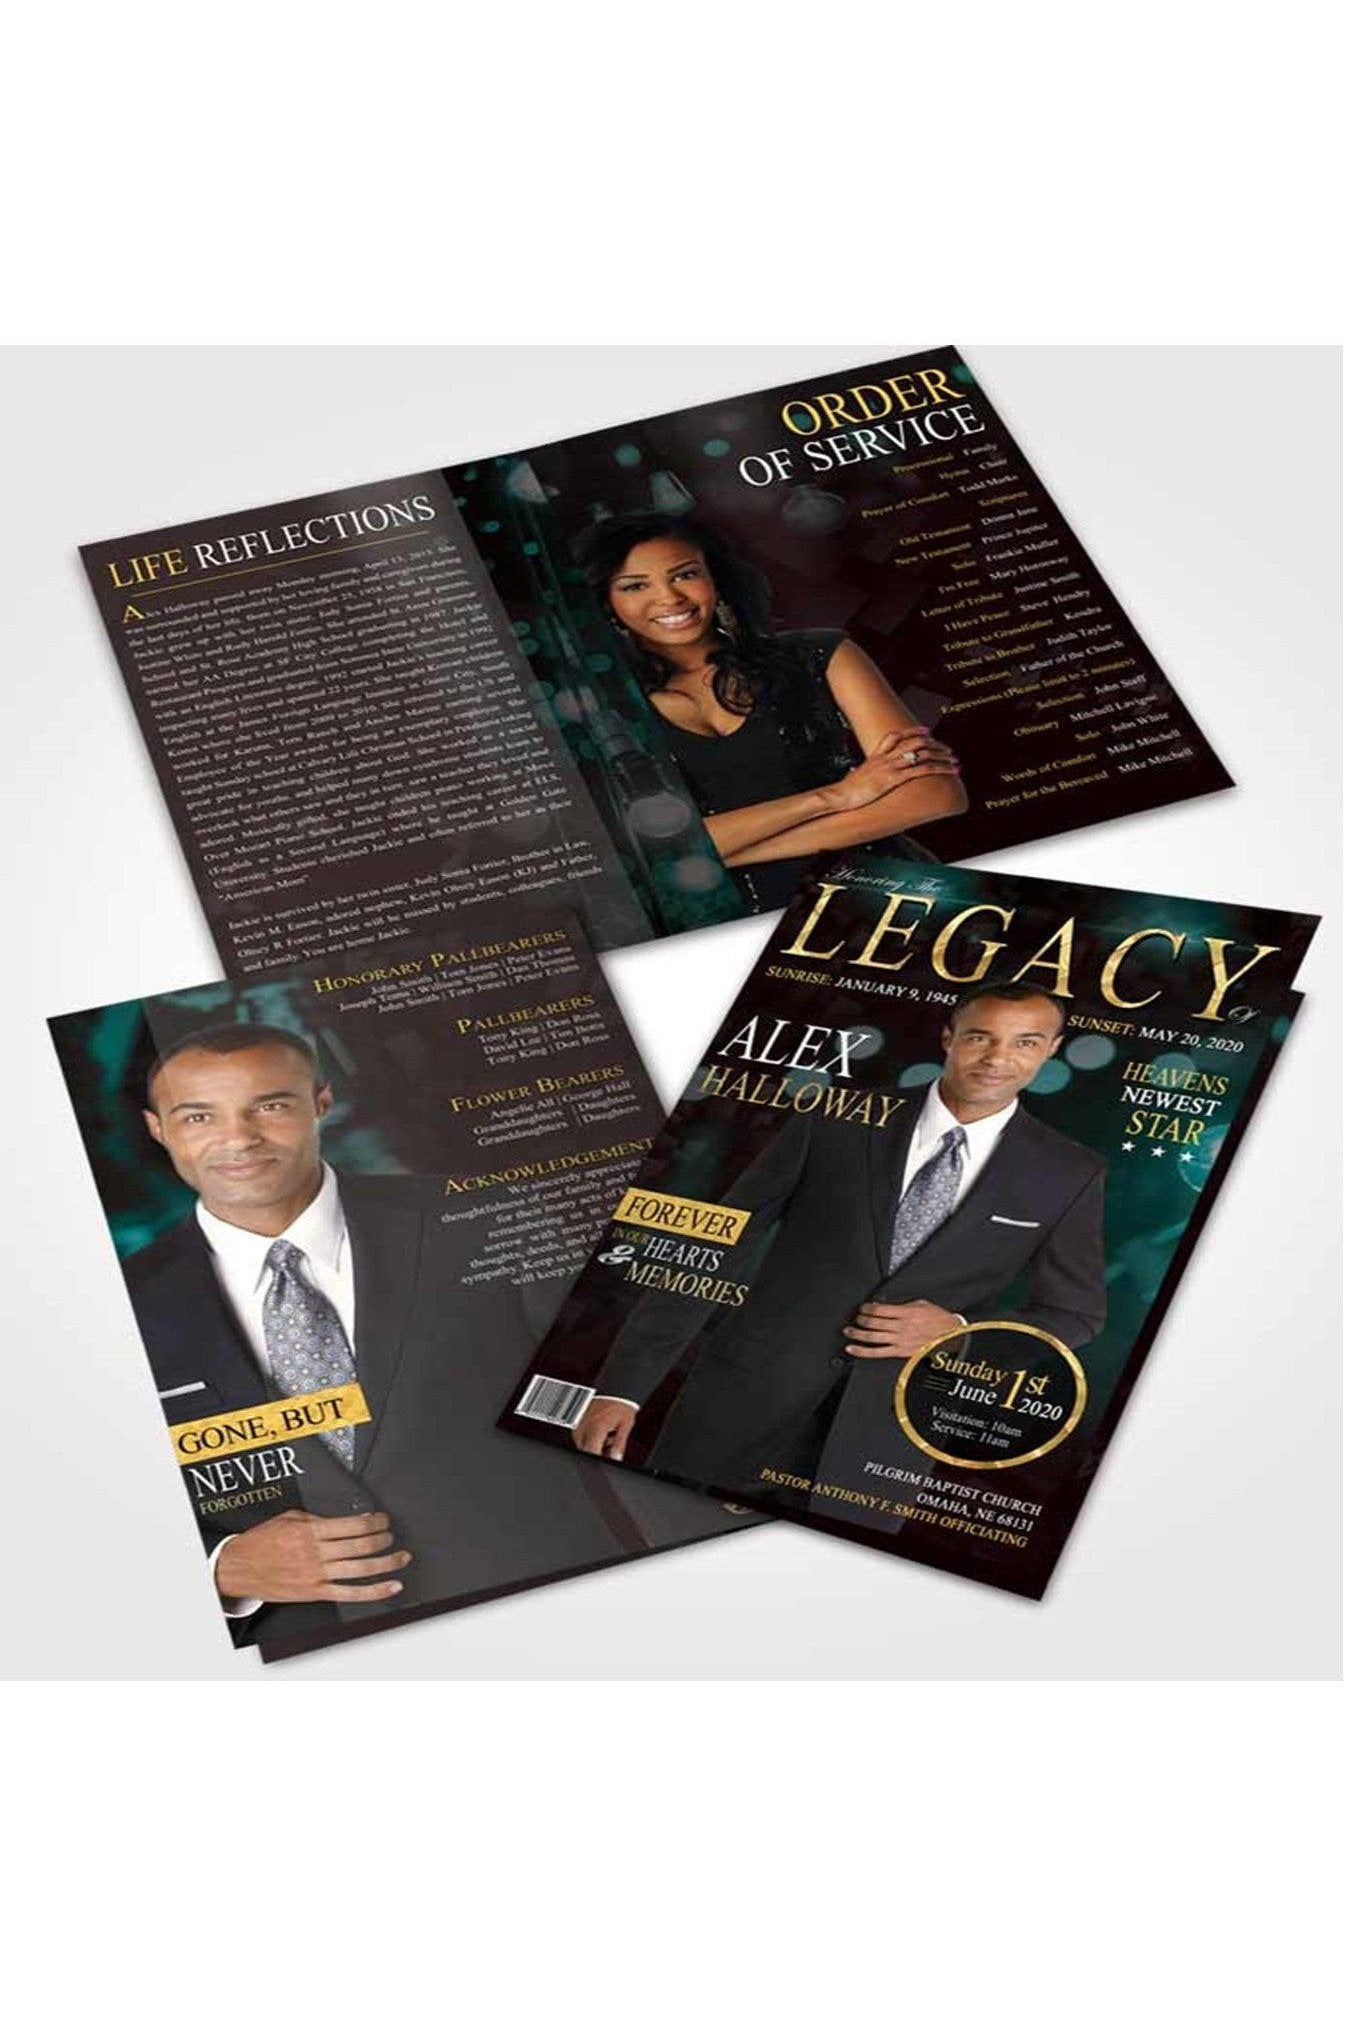 Legacy Times Collection Colors Obituaries - 4 and 8 Pages Bifold- 8.5x11 and 11x17 is priced at 100 - Freedom Printing